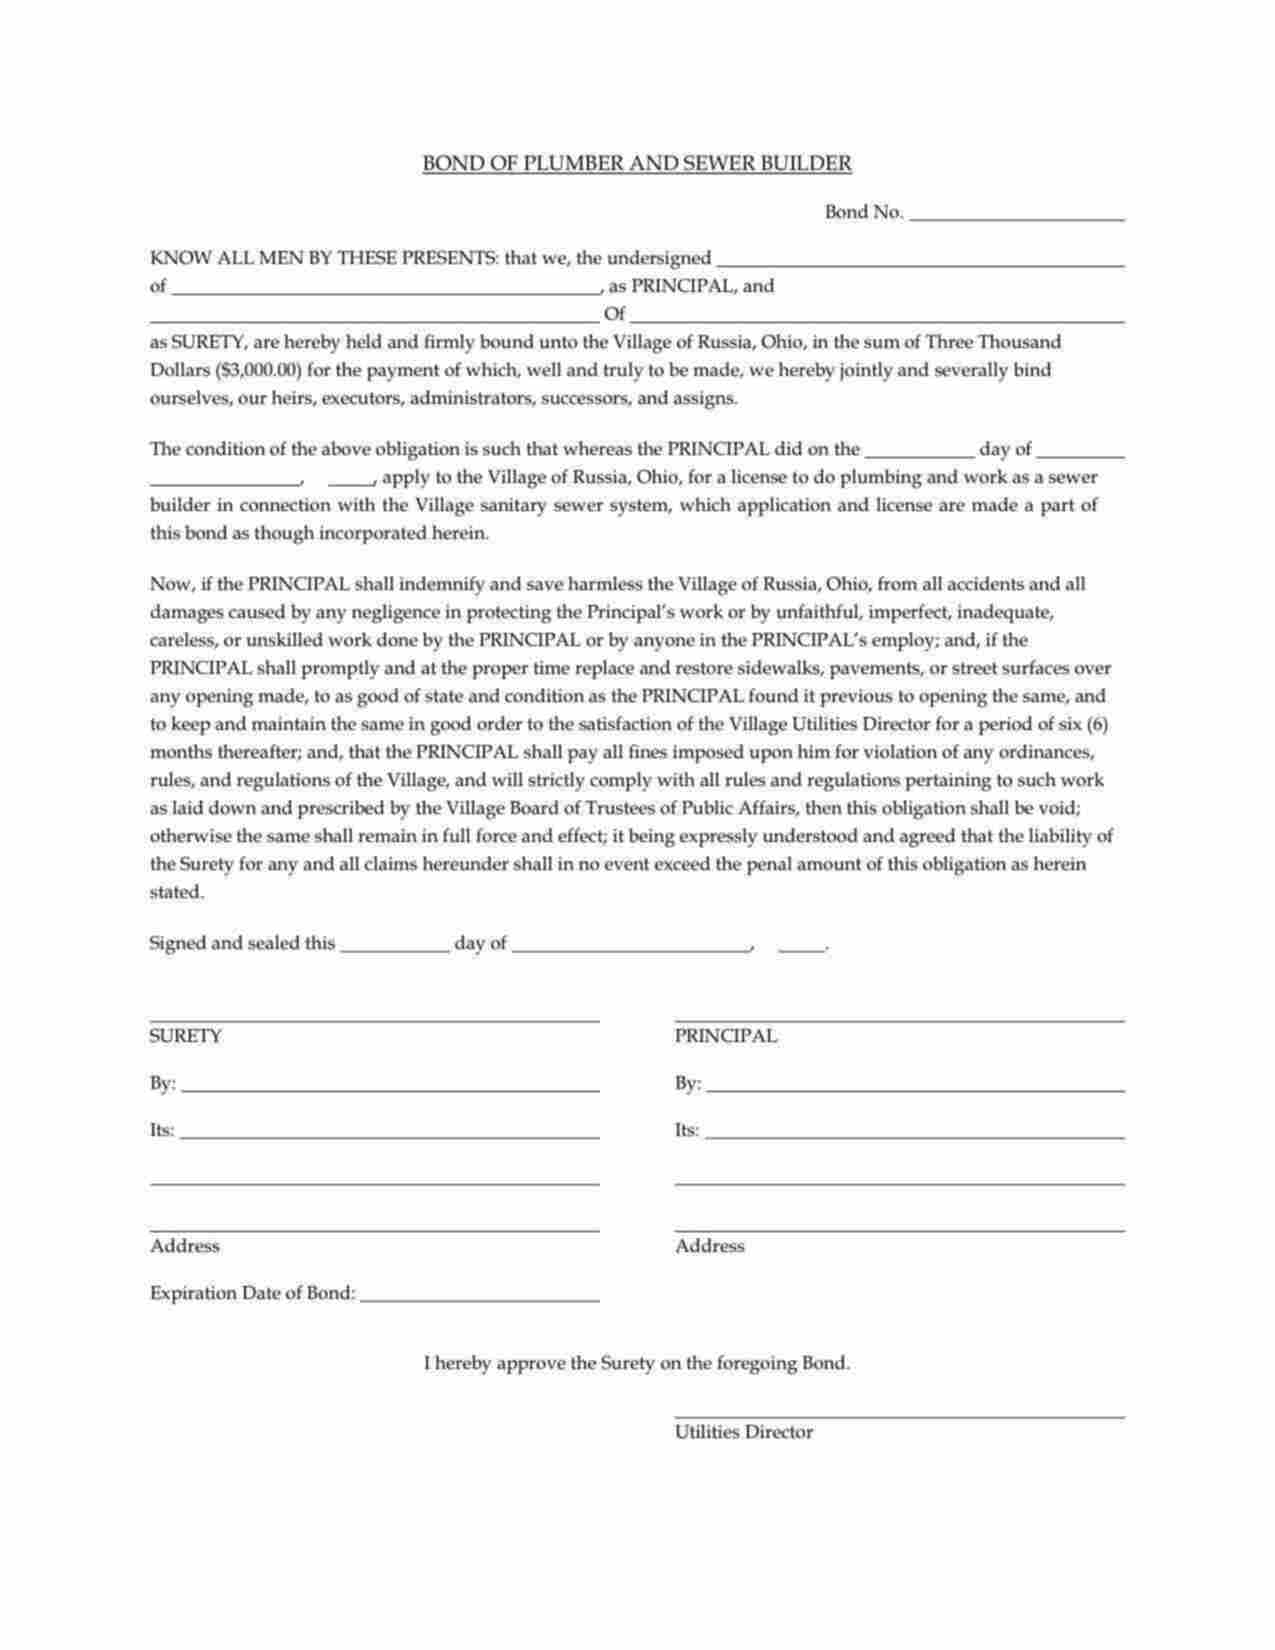 Ohio Plumber and Sewer Builder Bond Form